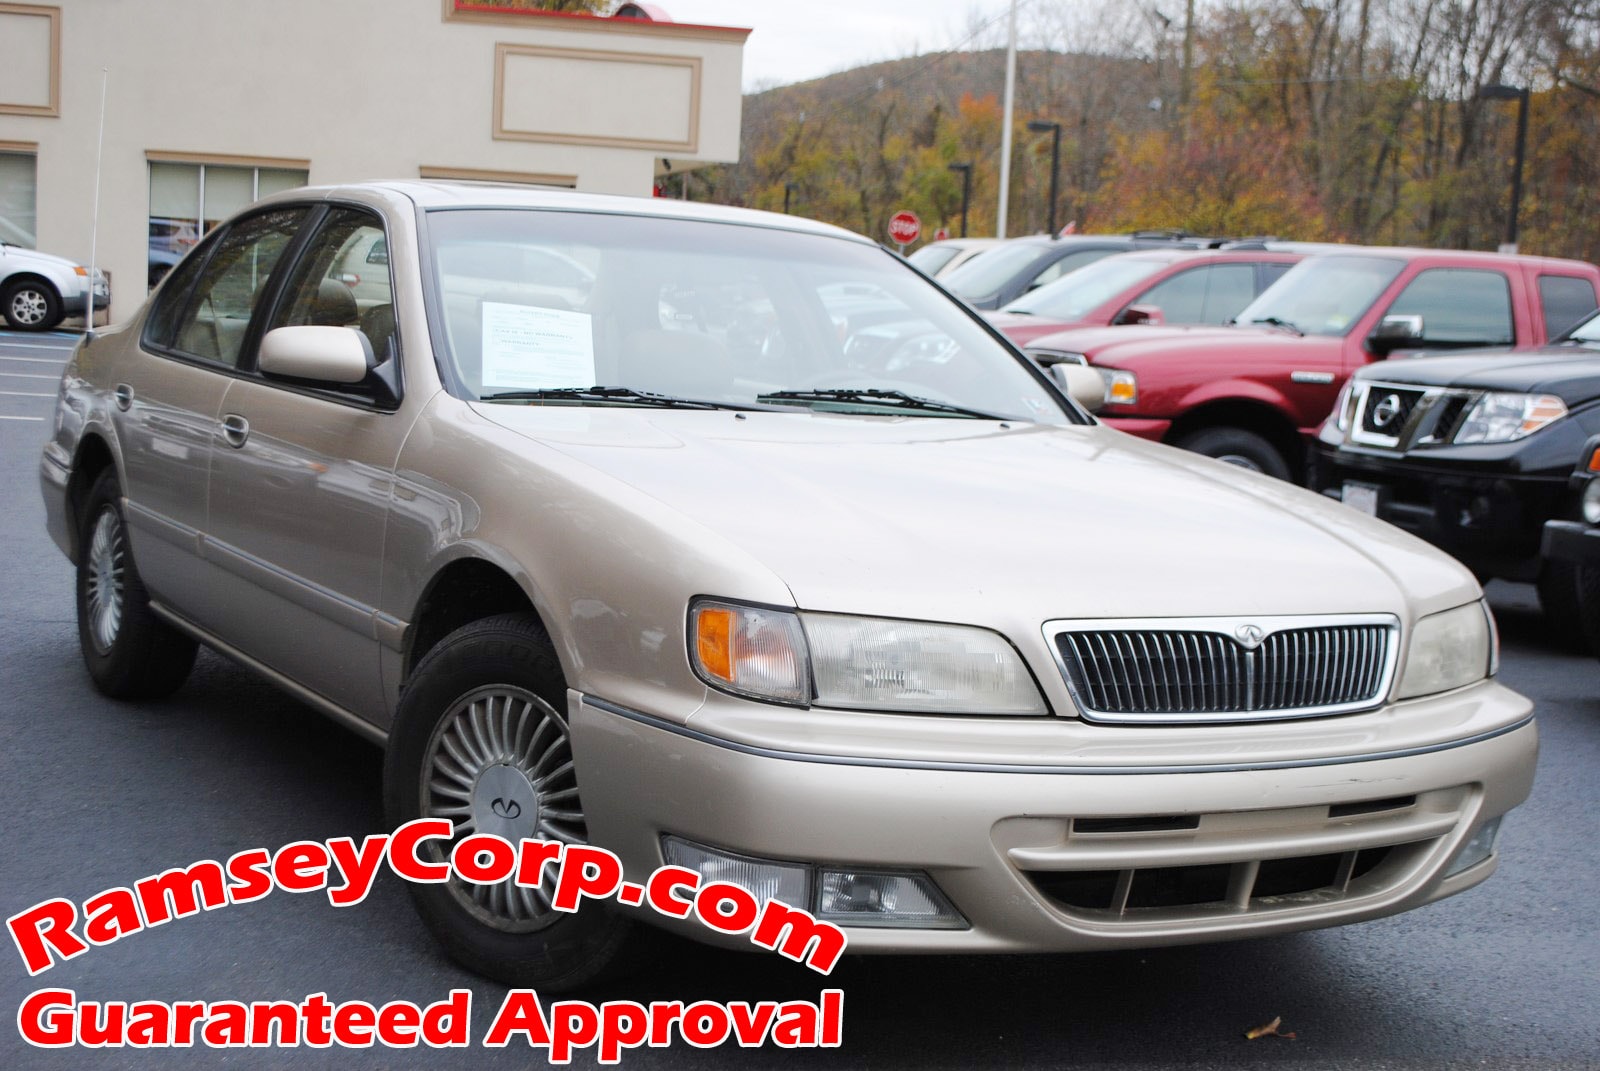 Used 1997 INFINITI I30 For Sale at Ramsey Corp. | VIN: JNKCA21D4VT505390